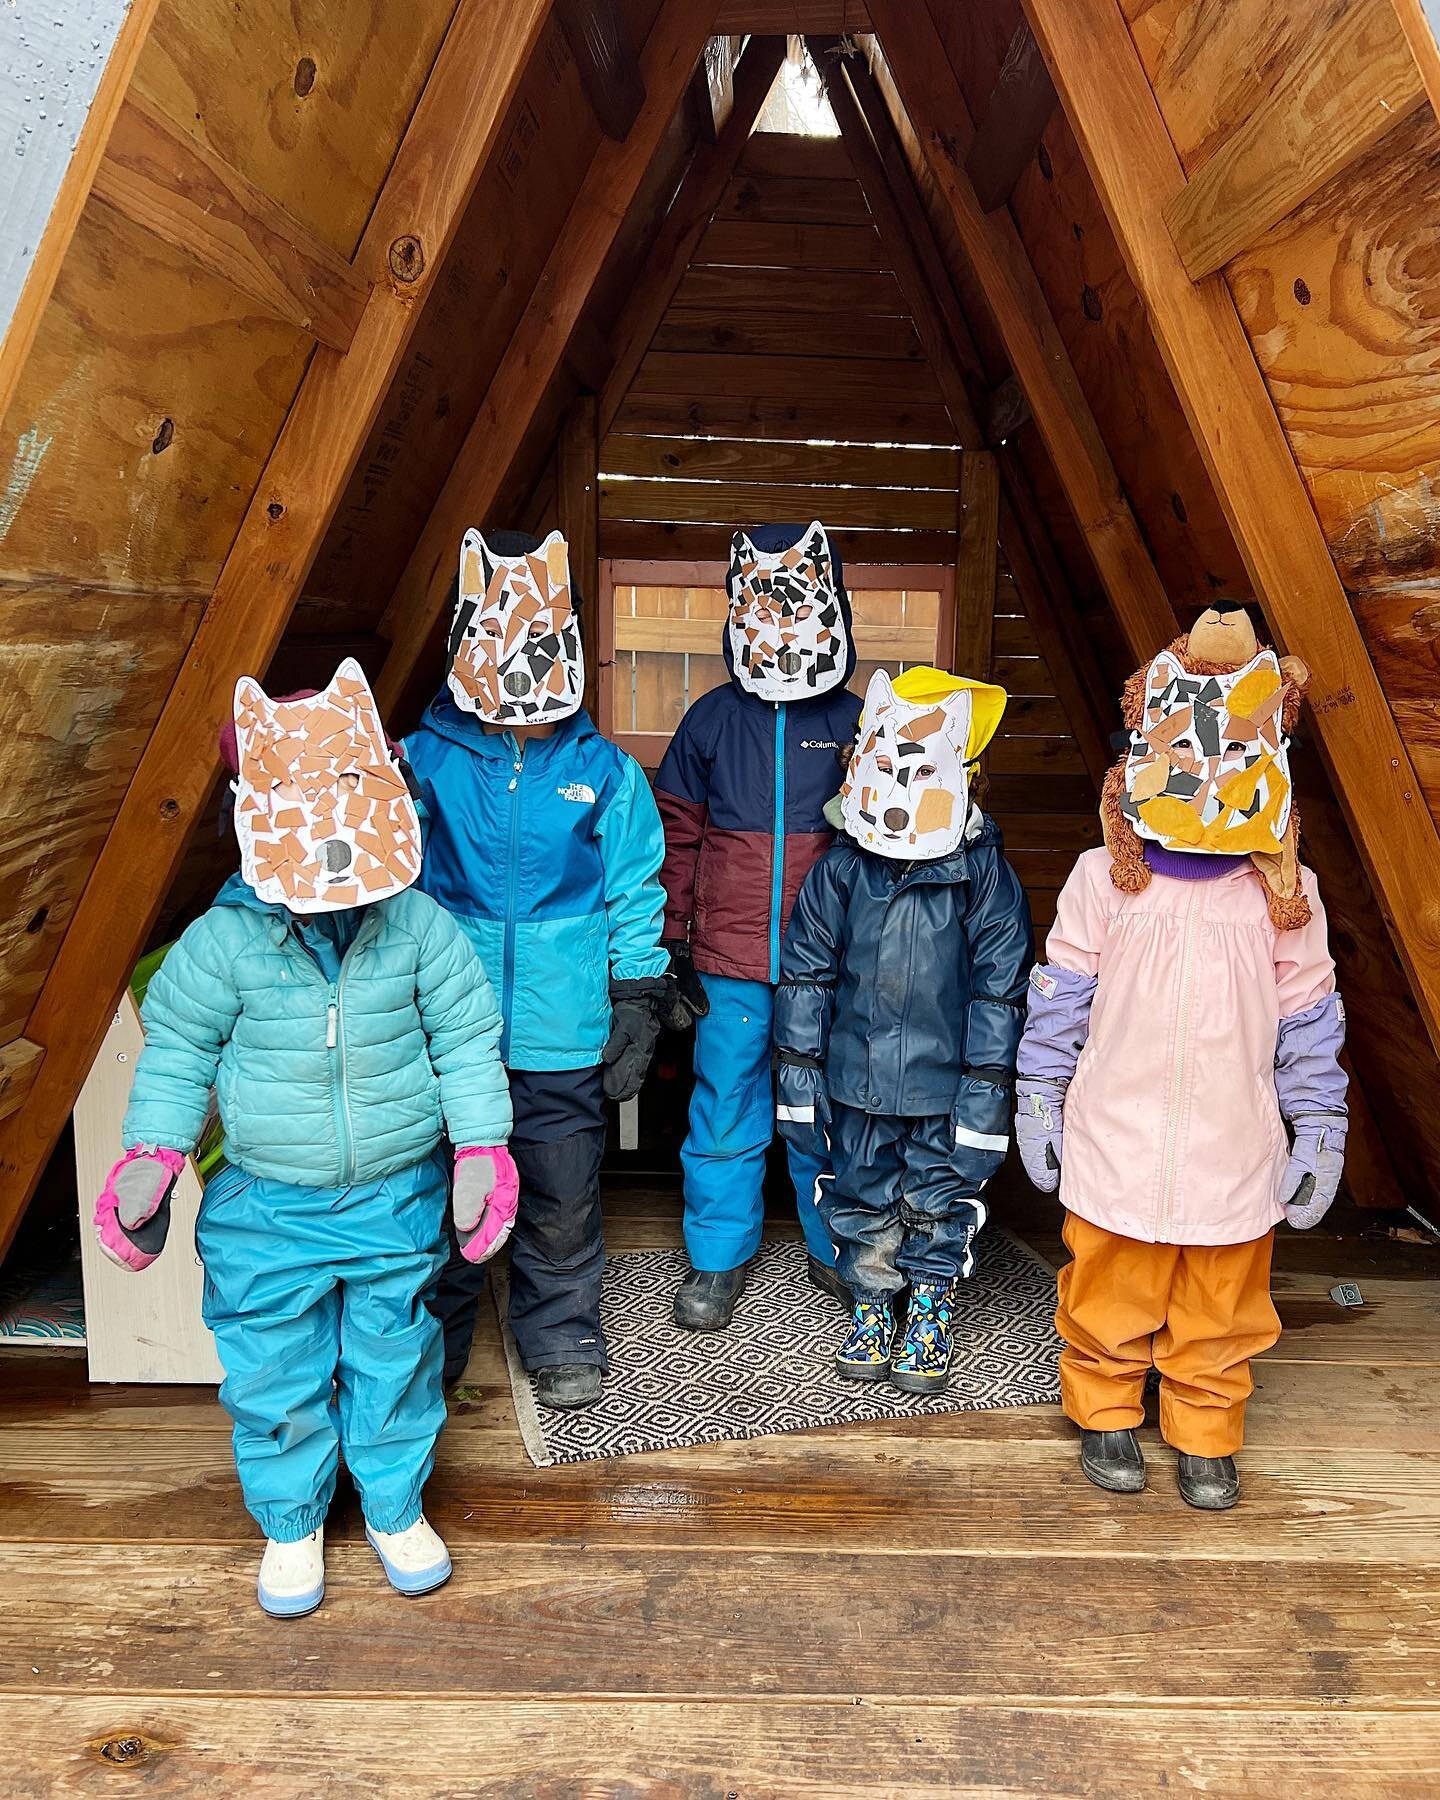 This week is wolf week here at Little Naturalists. Wolfs are incredible animals! They travel in families called packs and take care of one another.  Yesterday students worked on cutting, pasting, and arranging different colors and textures of various